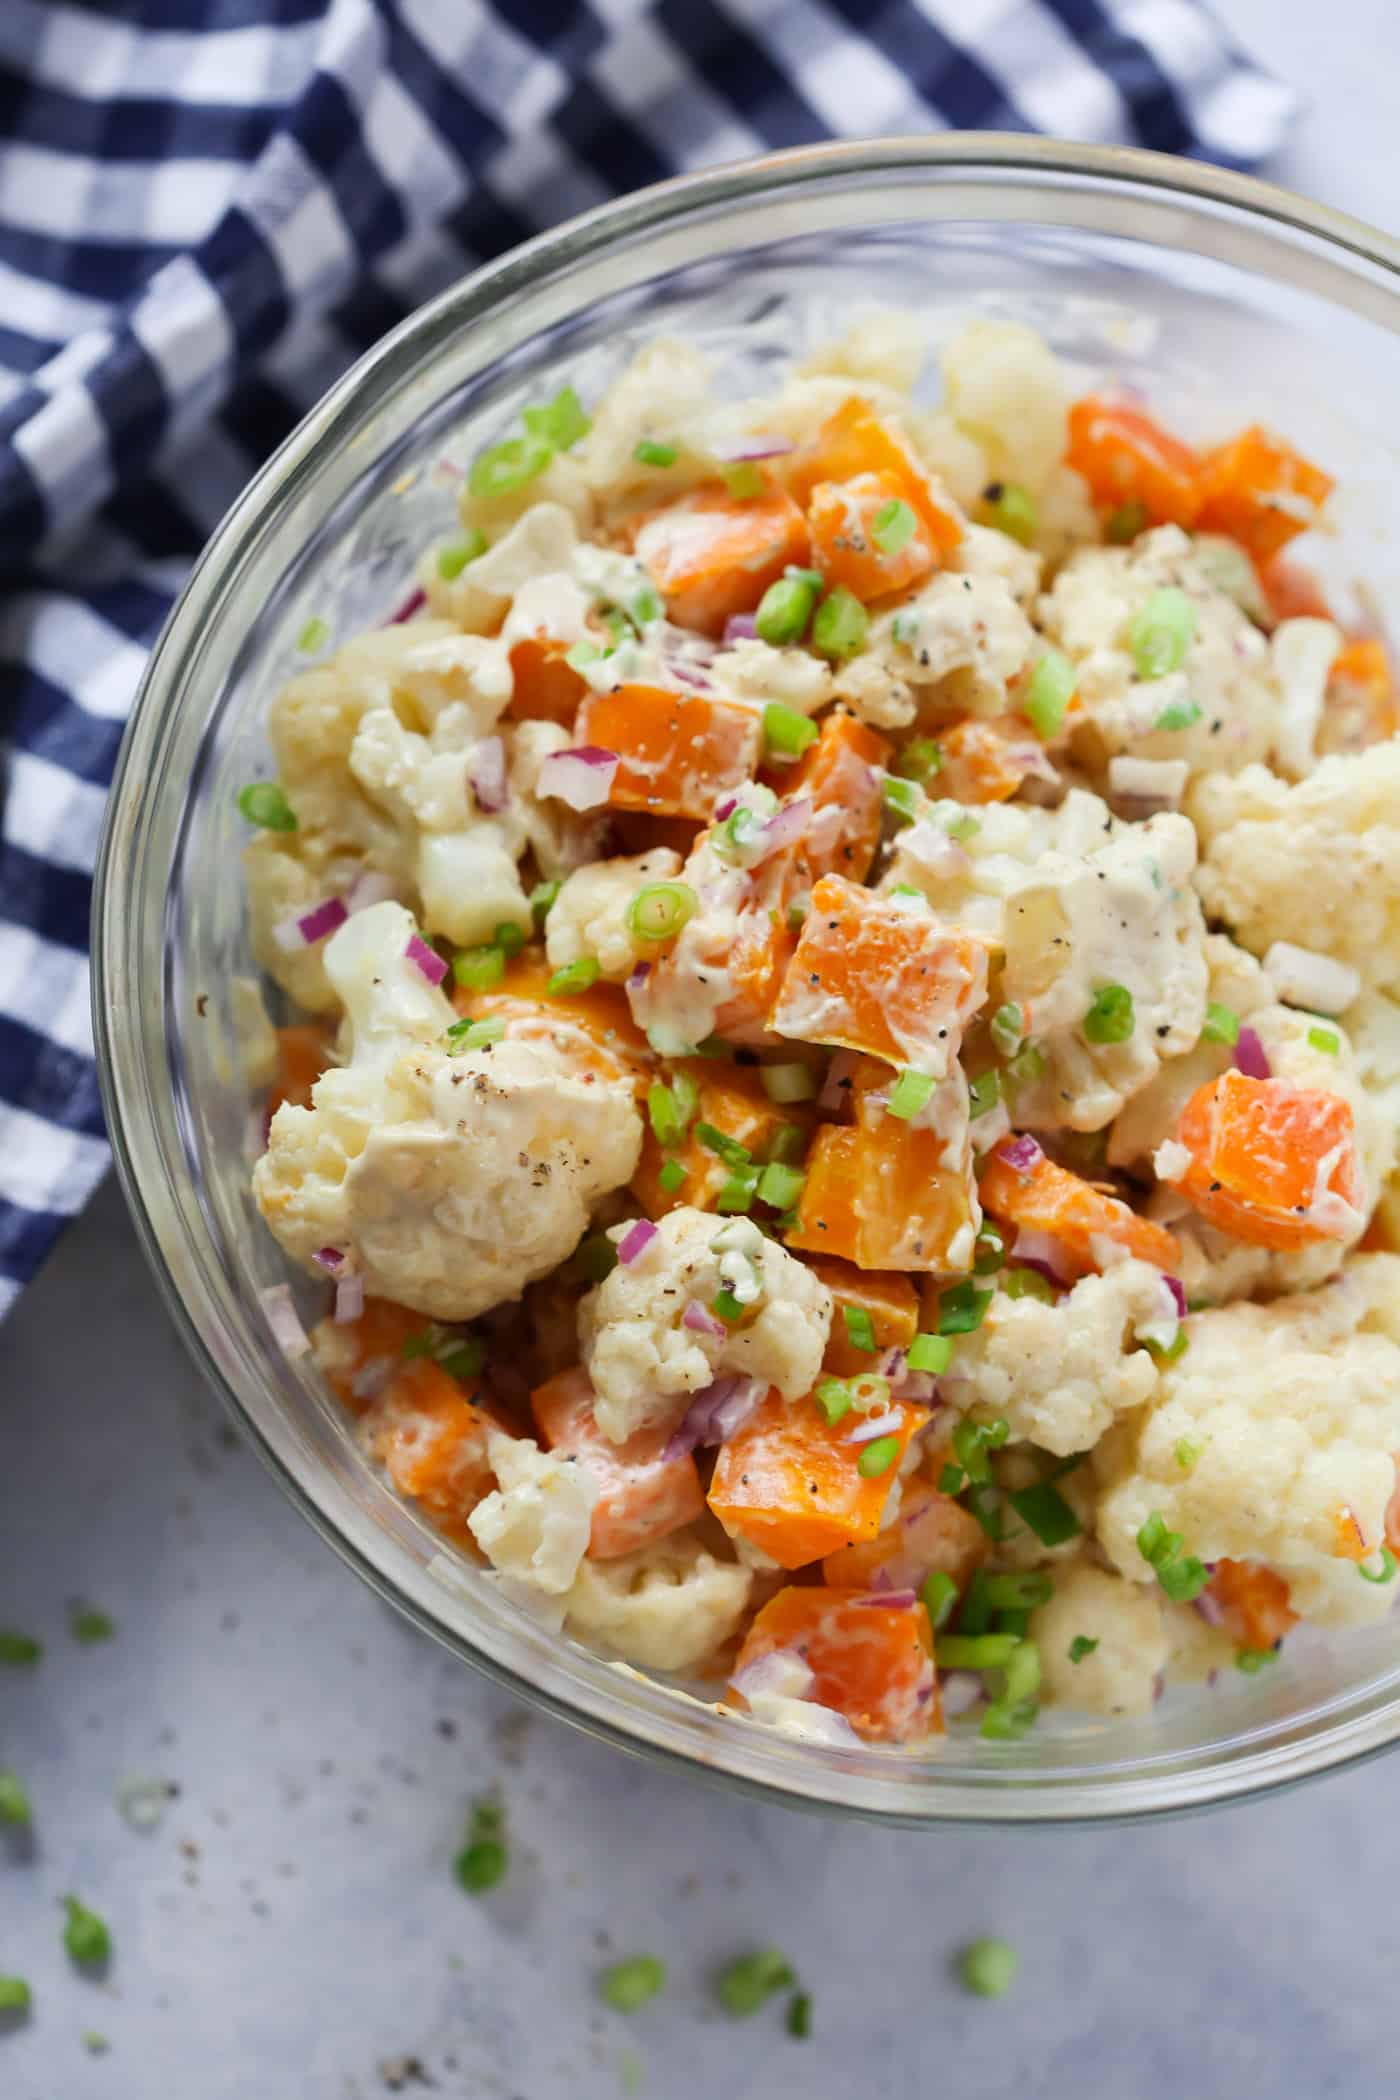 You’ll love this Roasted Butternut Squash Cauliflower Salad for fall. It’s tossed with an easy and very delicious vegan dressing.